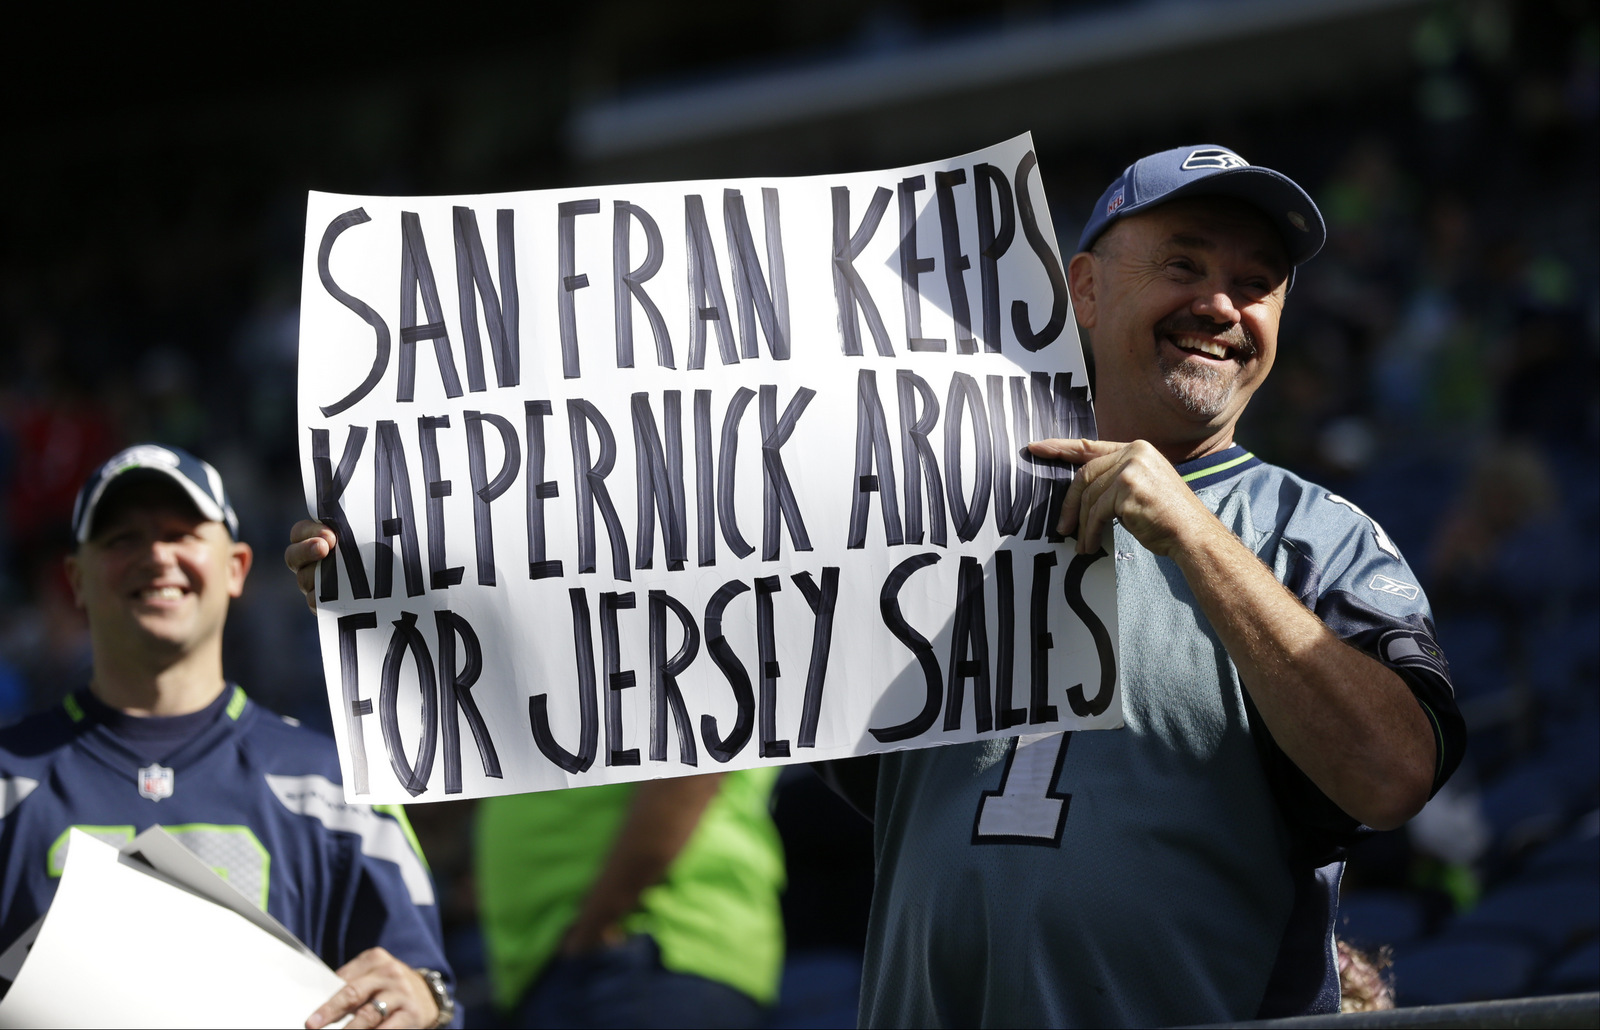 A Seattle Seahawks fan holds up a sign mocking Colin Kaepernick before an NFL game, Sept. 25, 2016, in Seattle. (AP/Ted S. Warren)